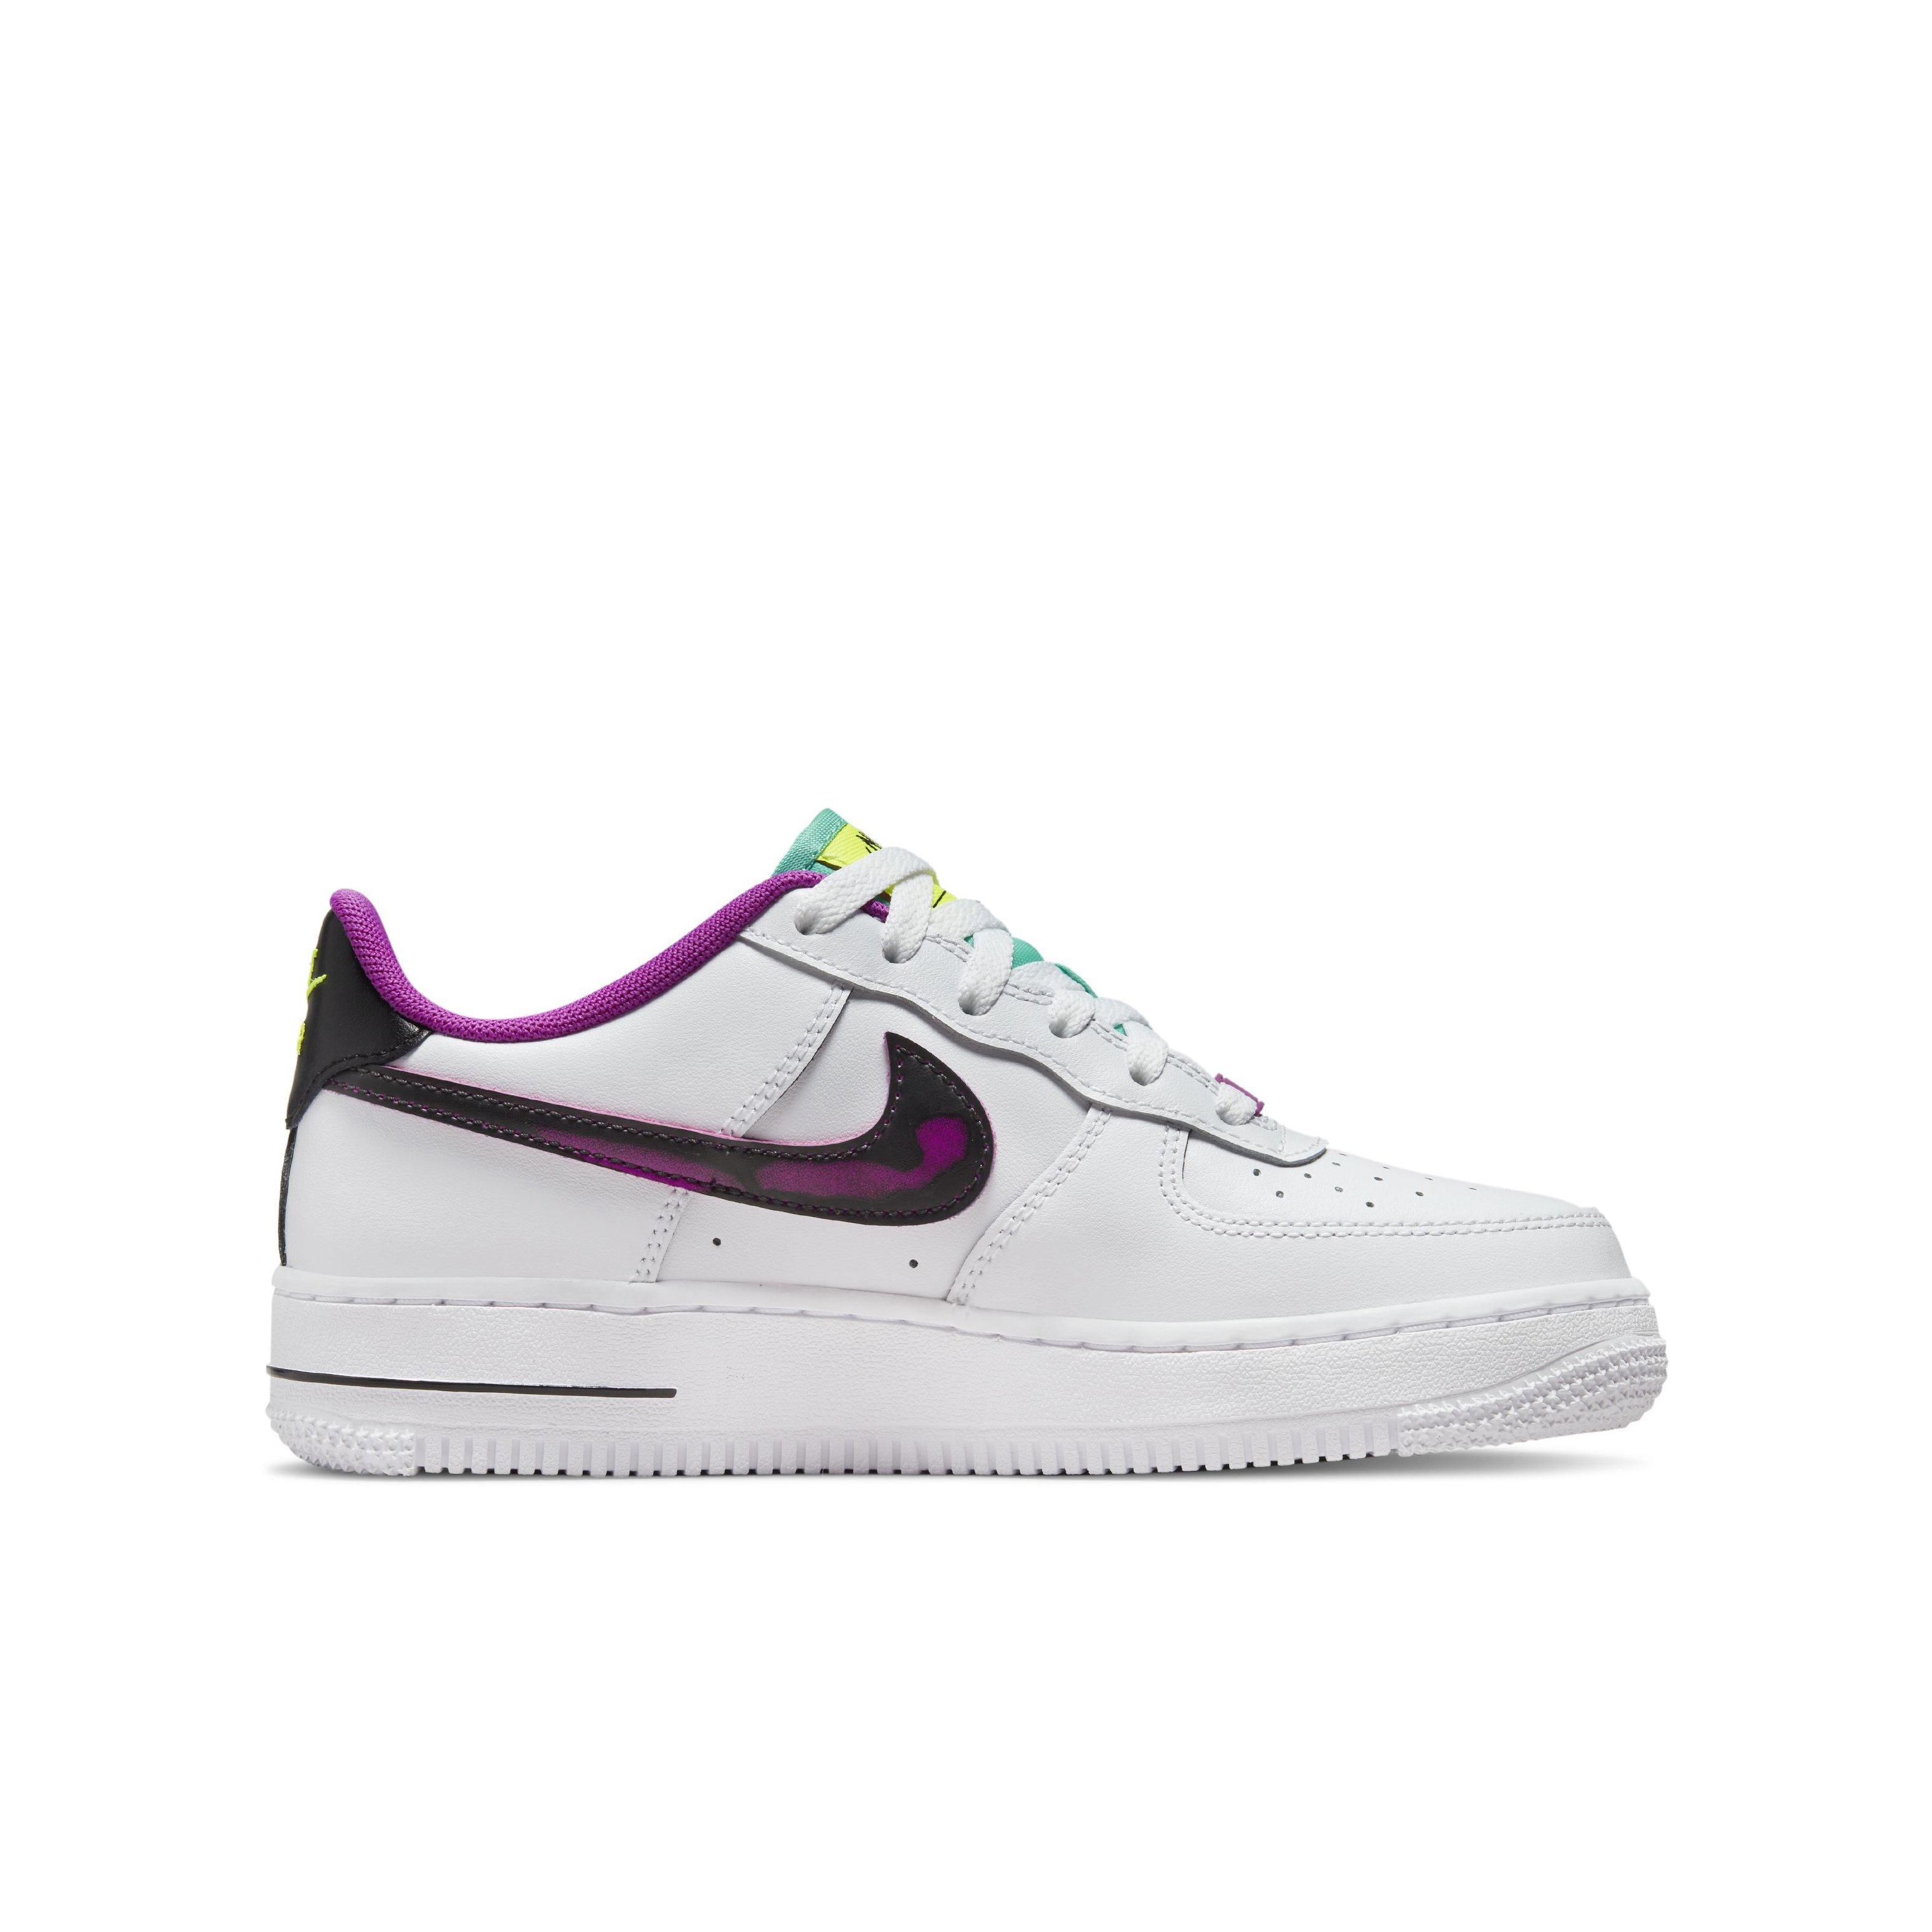 Nike Air Force 1 LV8 White/Space Purple/Sundial Toddler Boys' Shoes, Size: 5